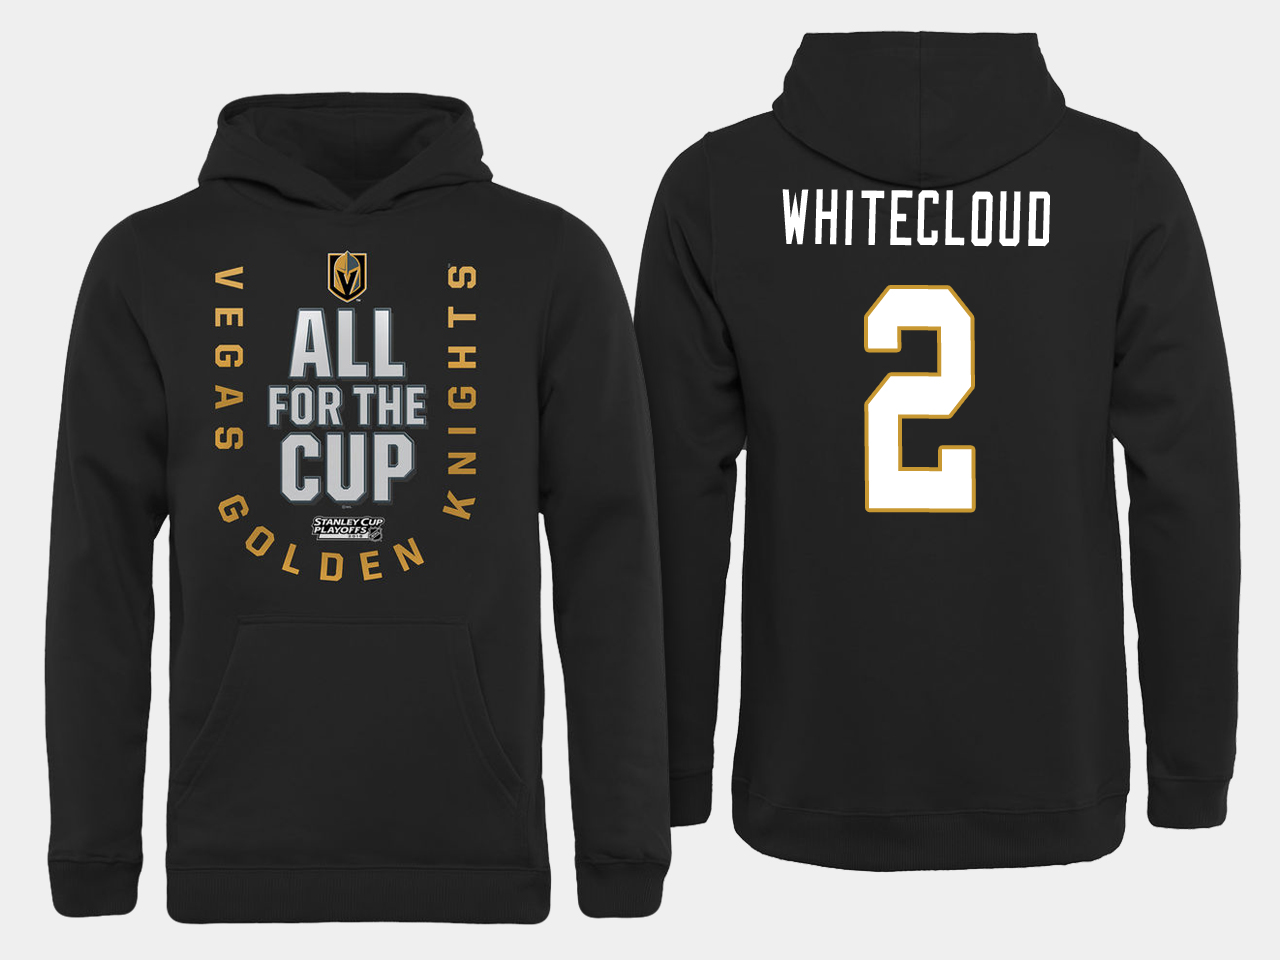 Men NHL Vegas Golden Knights 2 Whitecloud All for the Cup hoodie